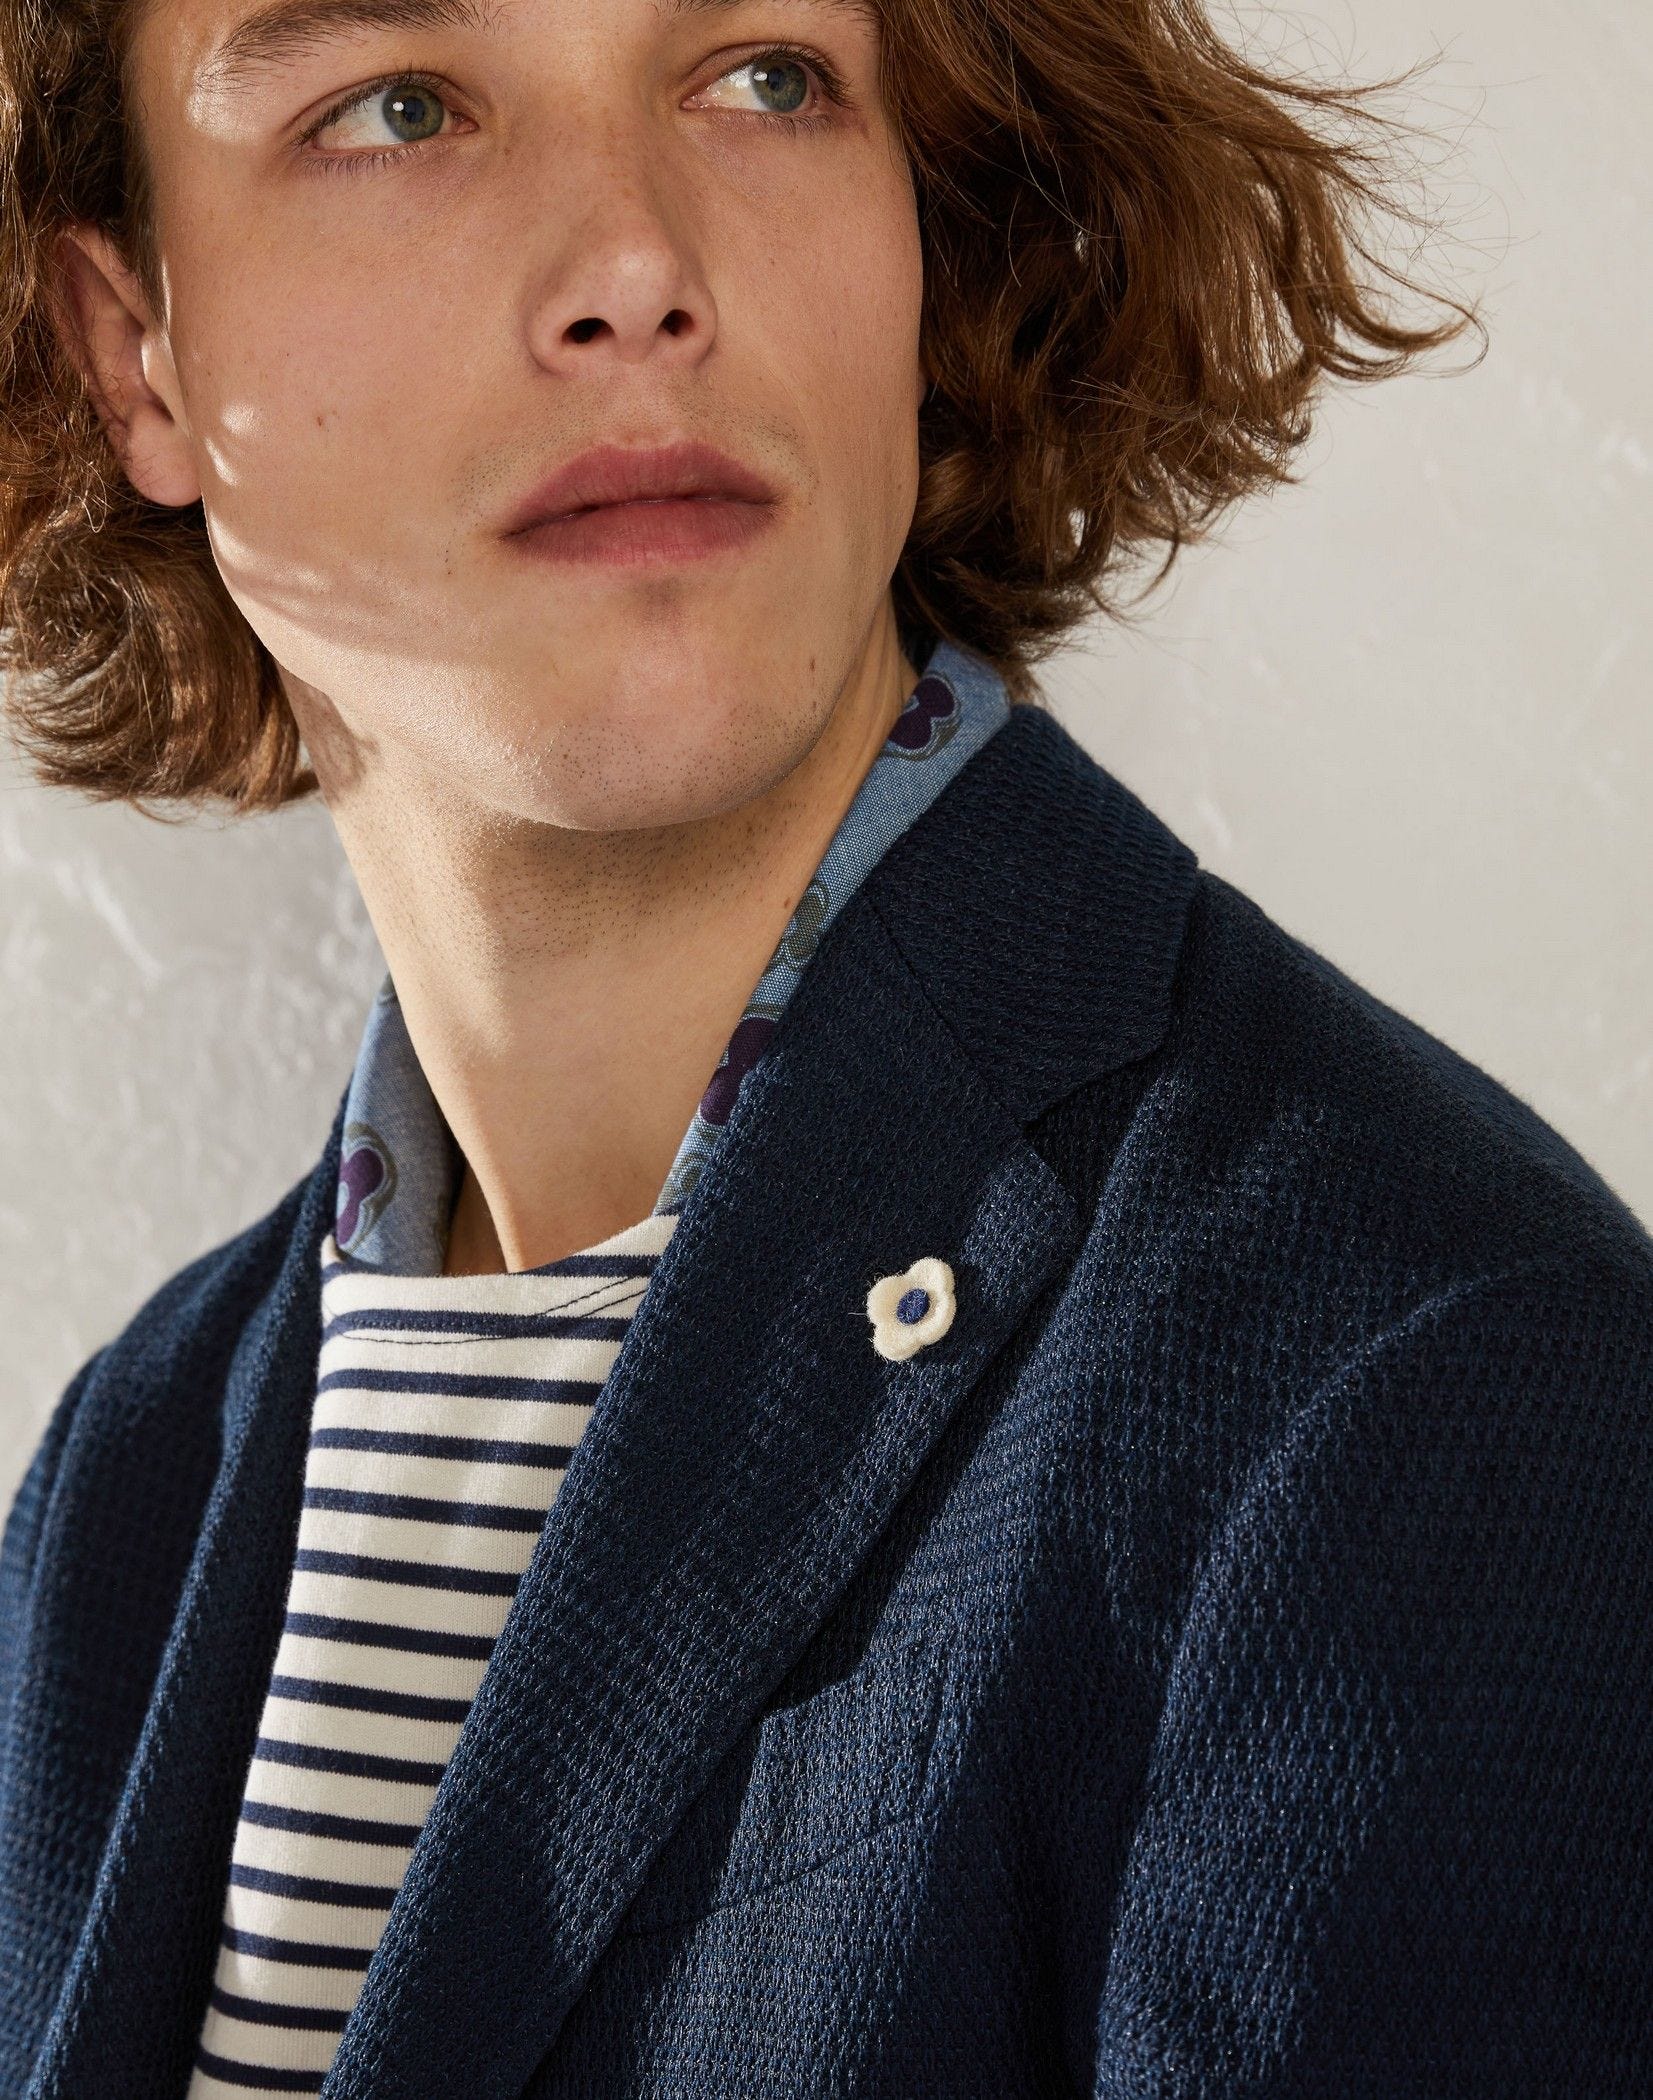 Blue linen and polyester jacket - Liknit